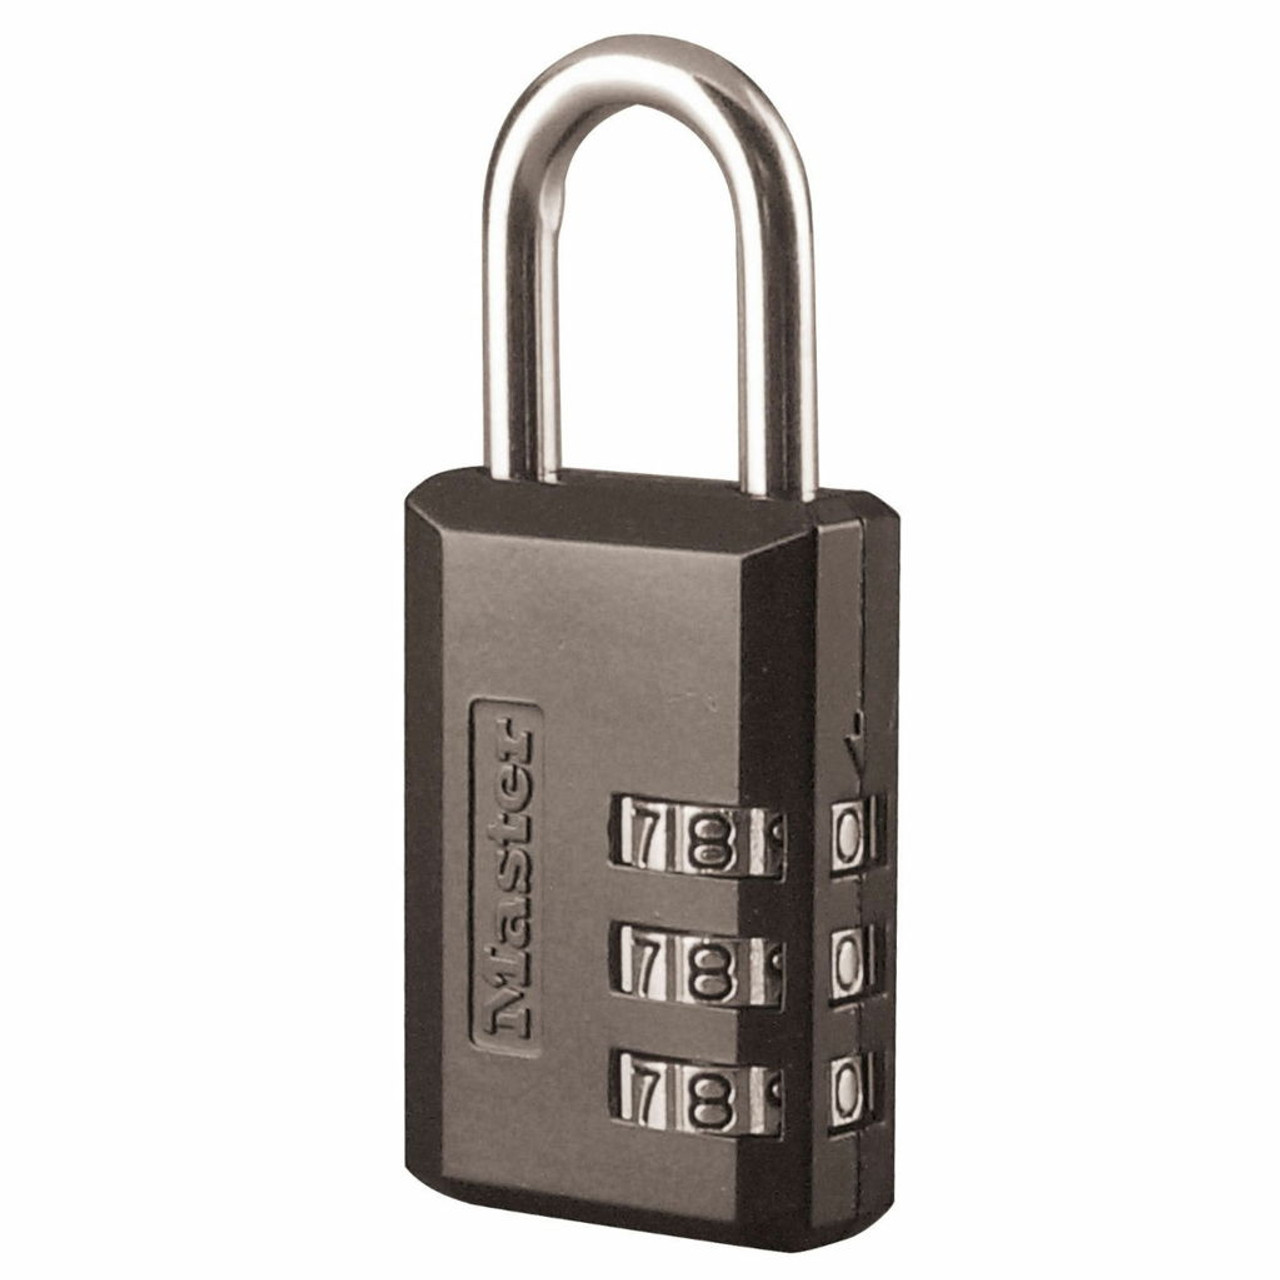 Combination TSA Approved lock 4 Digital for Luggage Bag Number